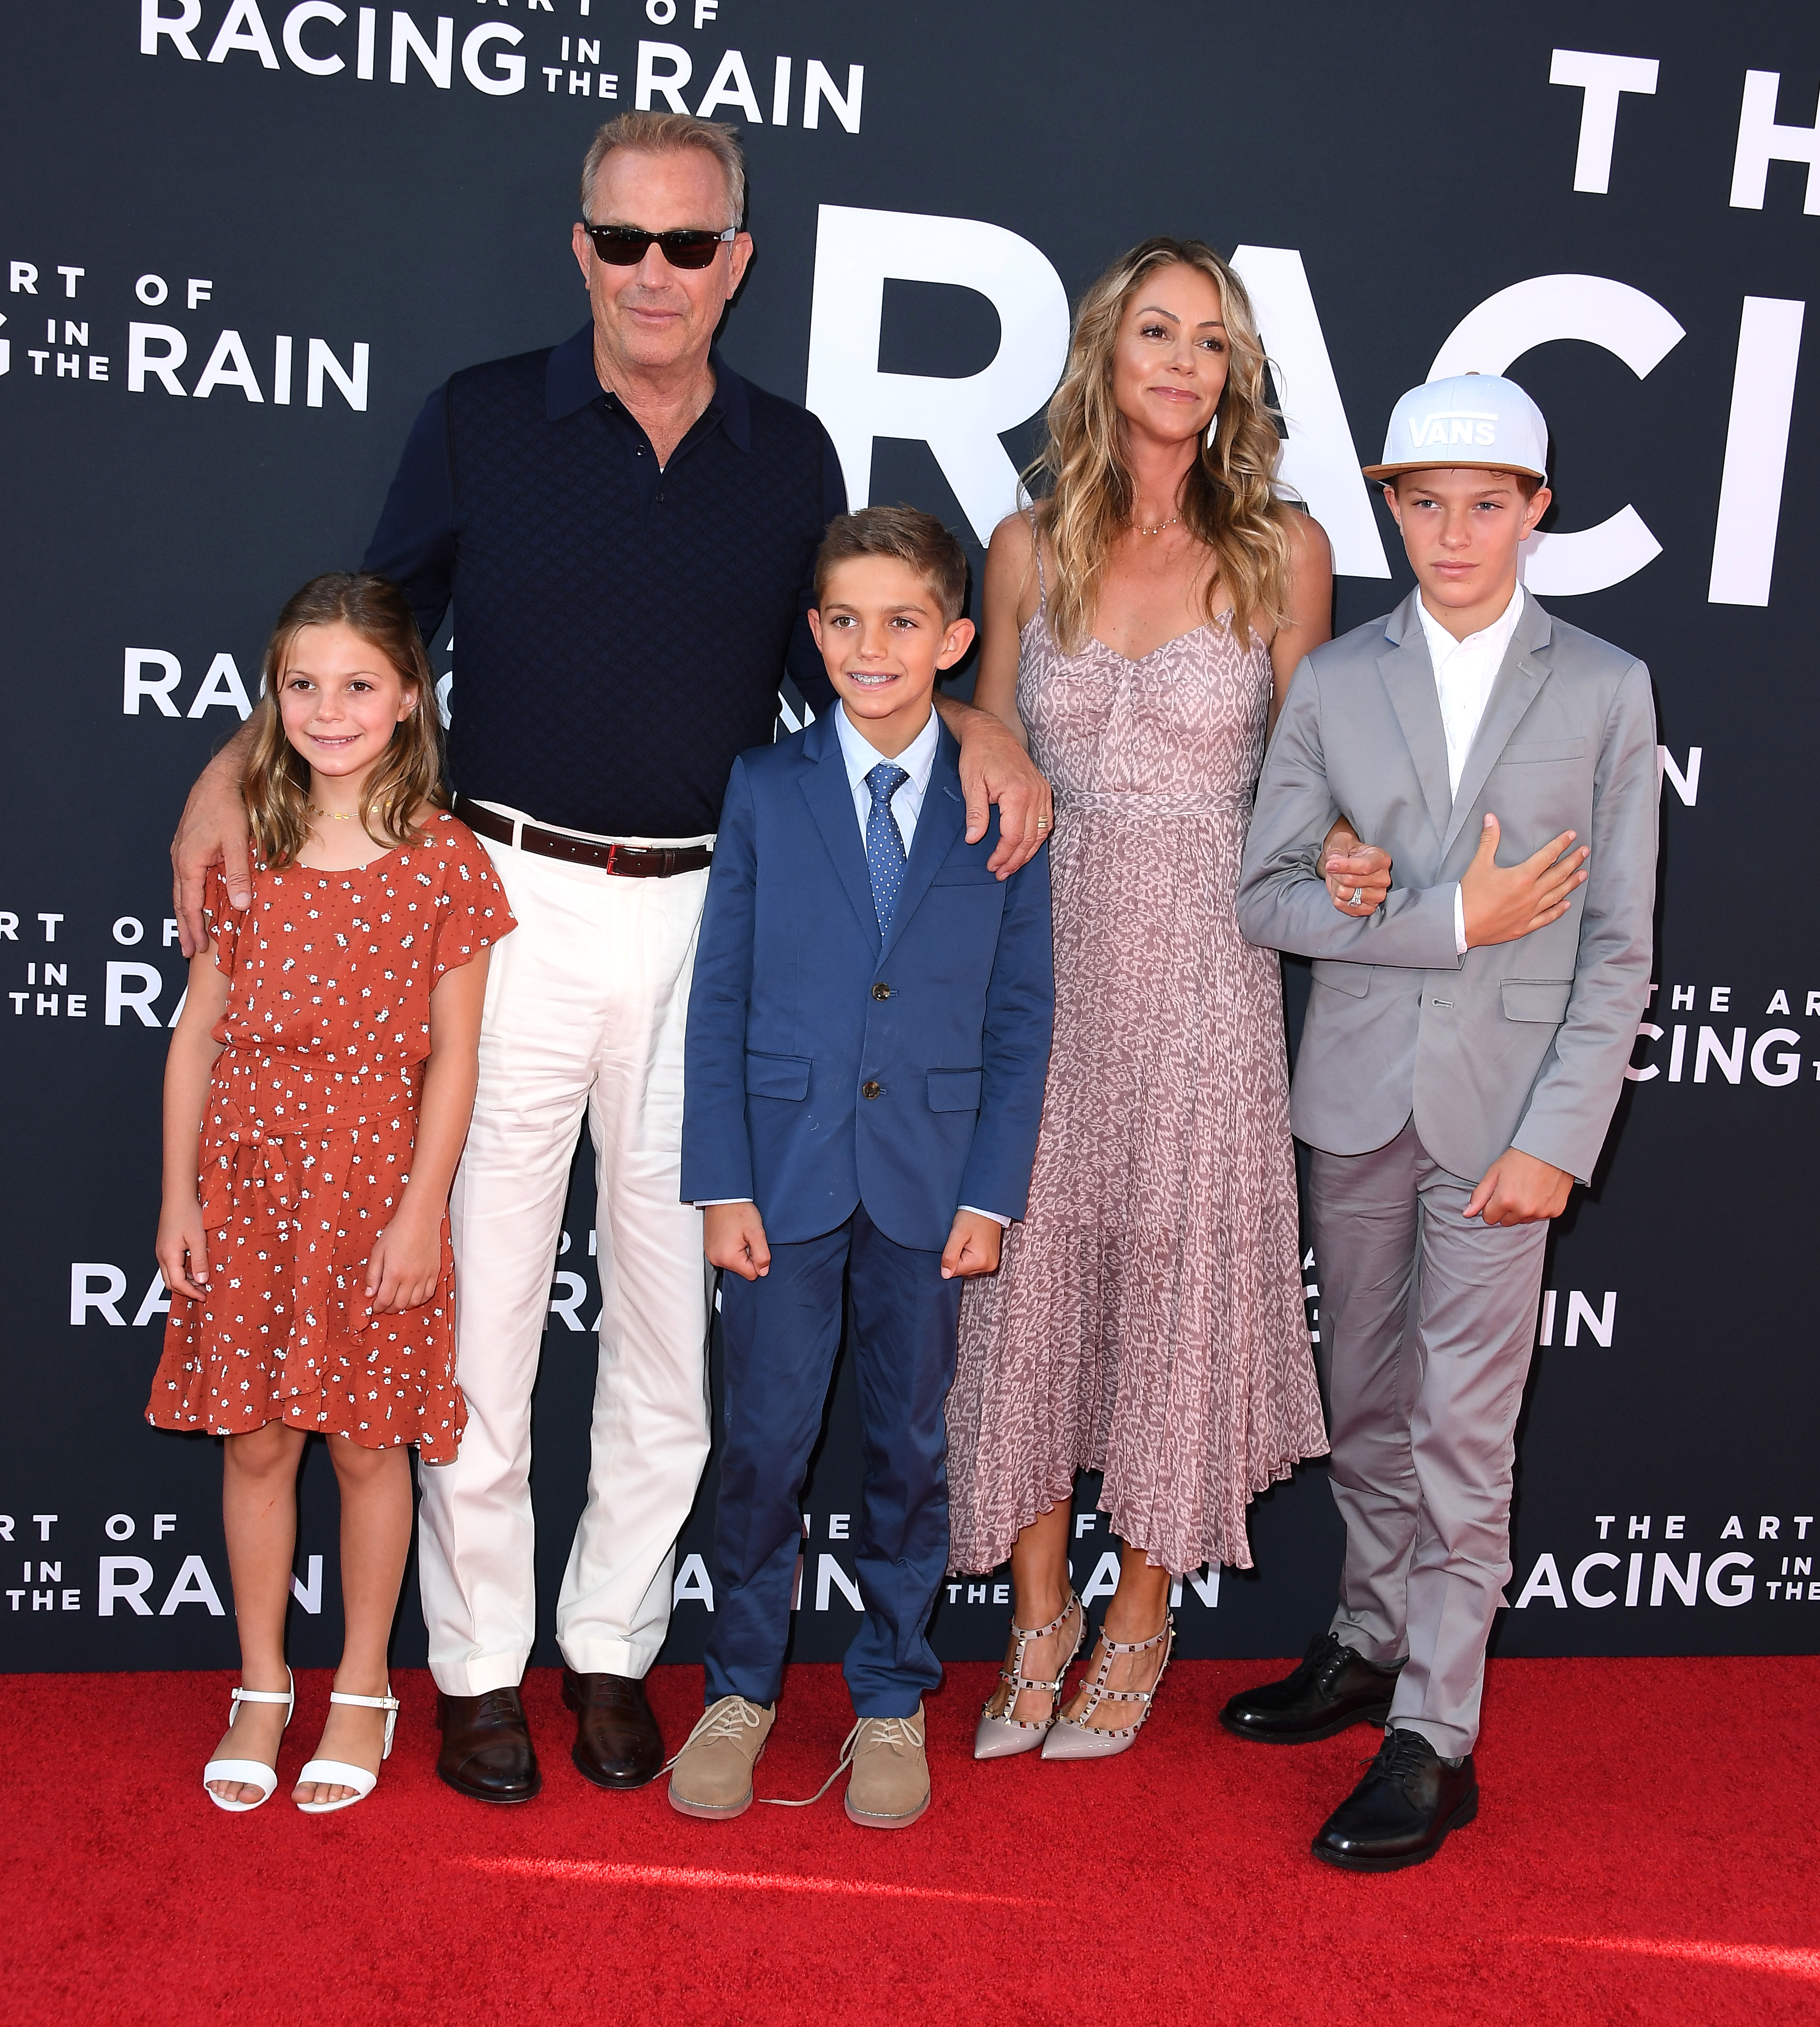 Kevin Costner at the premiere of 20th Century Fox's "The Art of Racing In The Rain" at El Capitan Theatre on August 01, 2019 in Los Angeles, California | Source: Getty Images